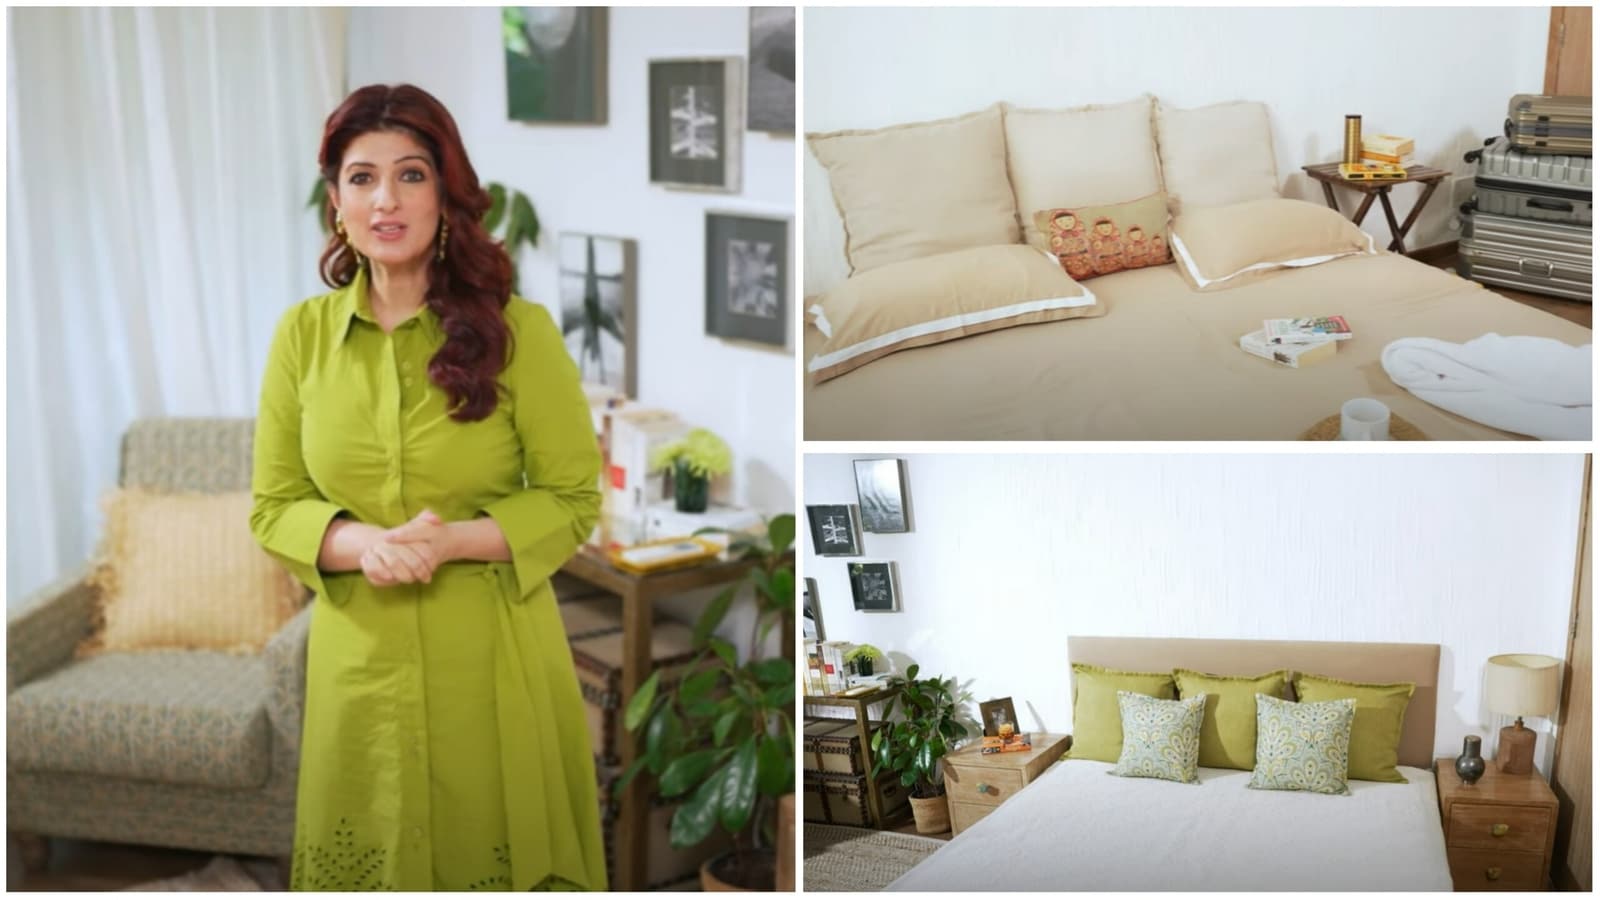 Twinkle Khanna turns master bedroom into 'oasis of peace' on budget of ₹3,500, shares hilarious struggles. Watch